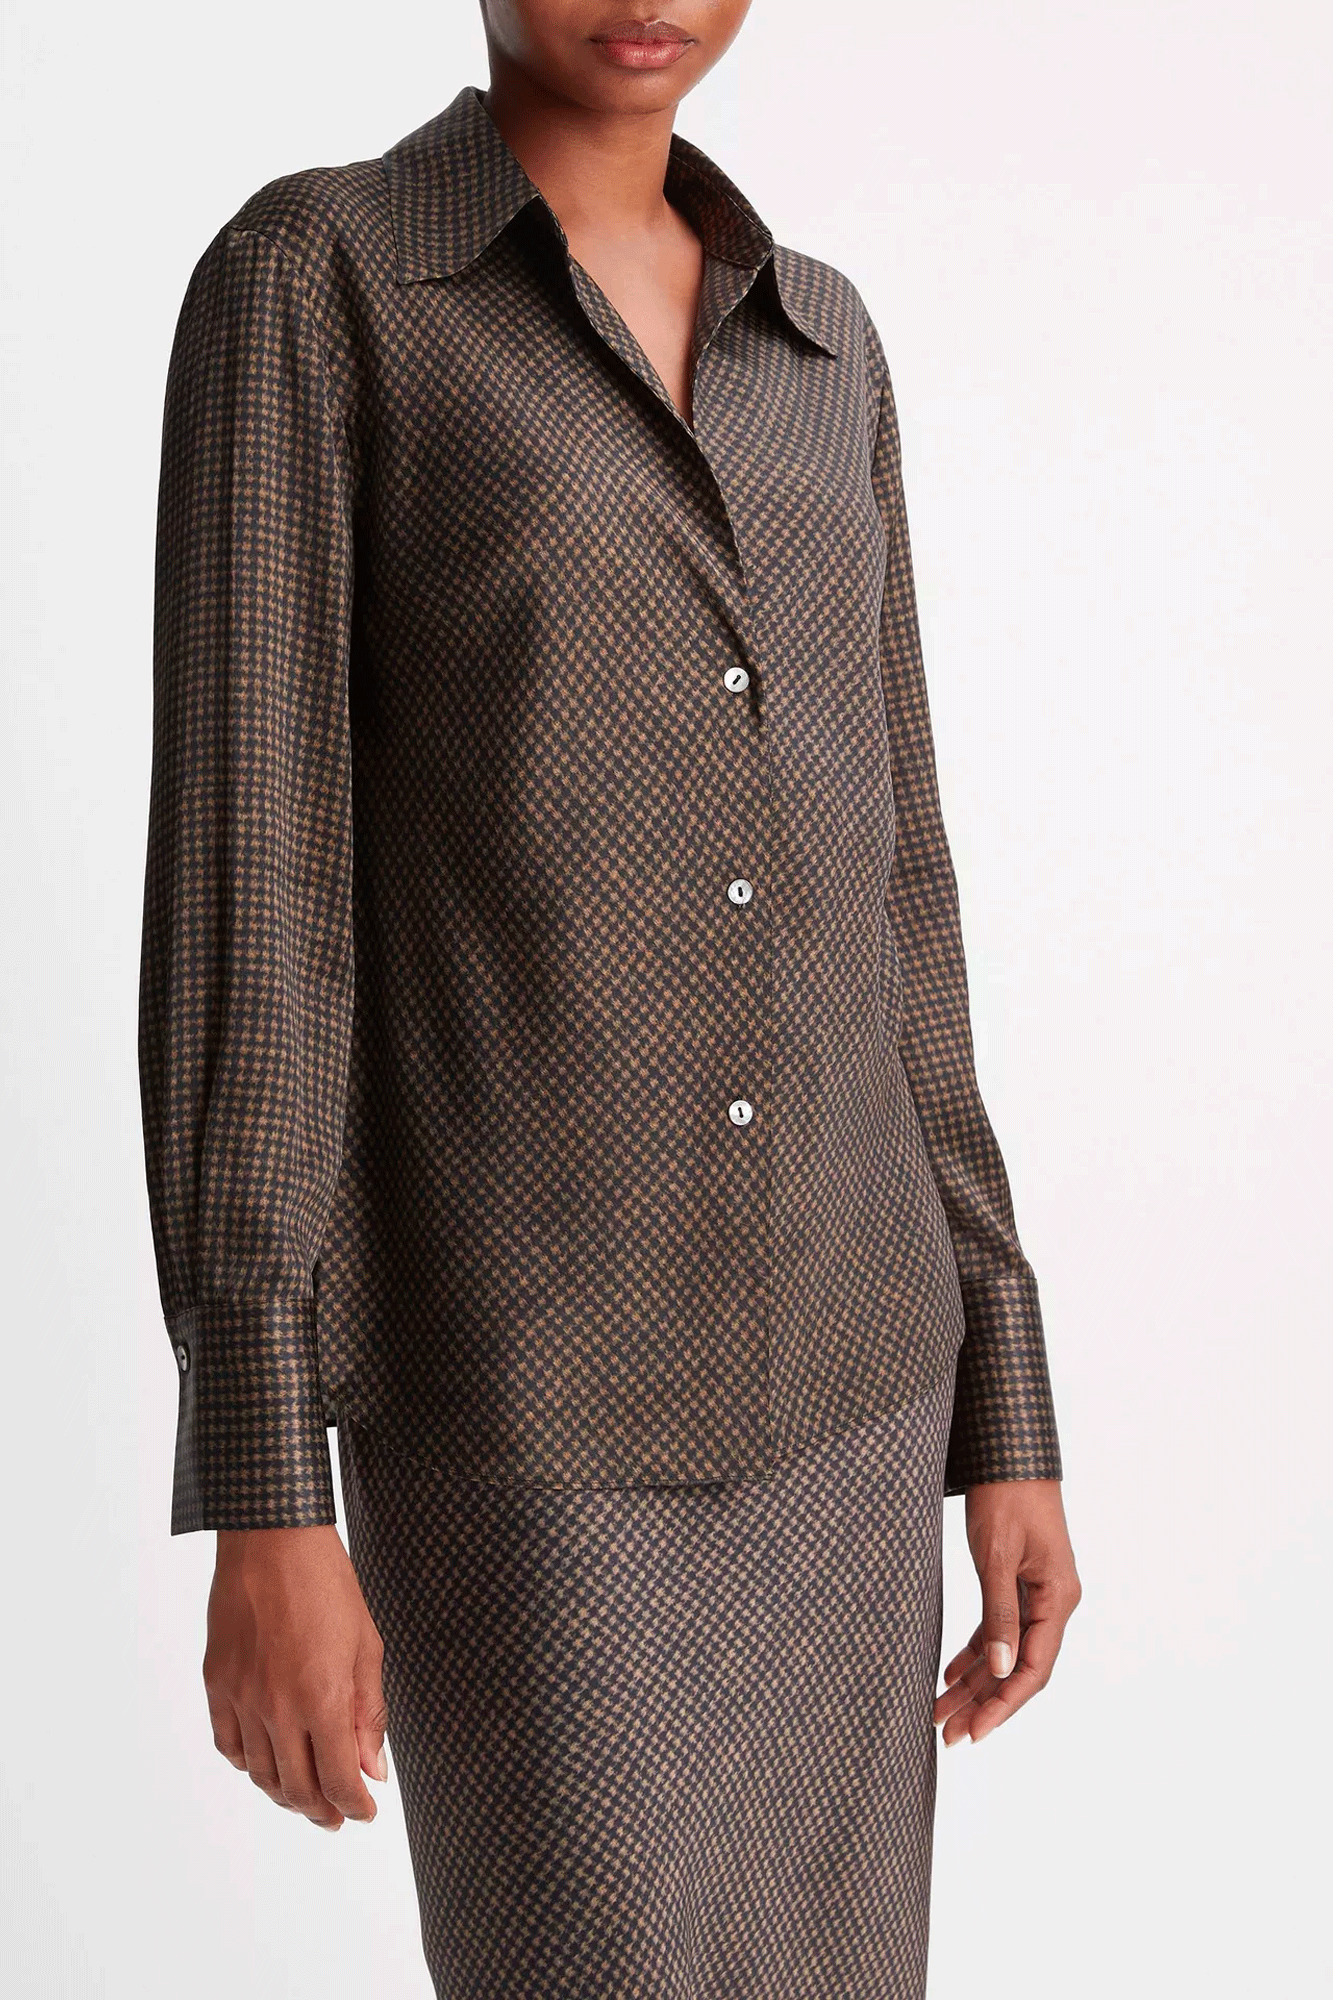 Flattering and fashionable, our Brushed Houndstooth Bias Long Sleeve Blouse from Vince is cut on the bias for a slim, contoured fit. The open-collared neckline and front cutaway add a stylish touch, while the Houndstooth pattern makes a bold statement. Wear with the matching skirt for a polished ensemble.